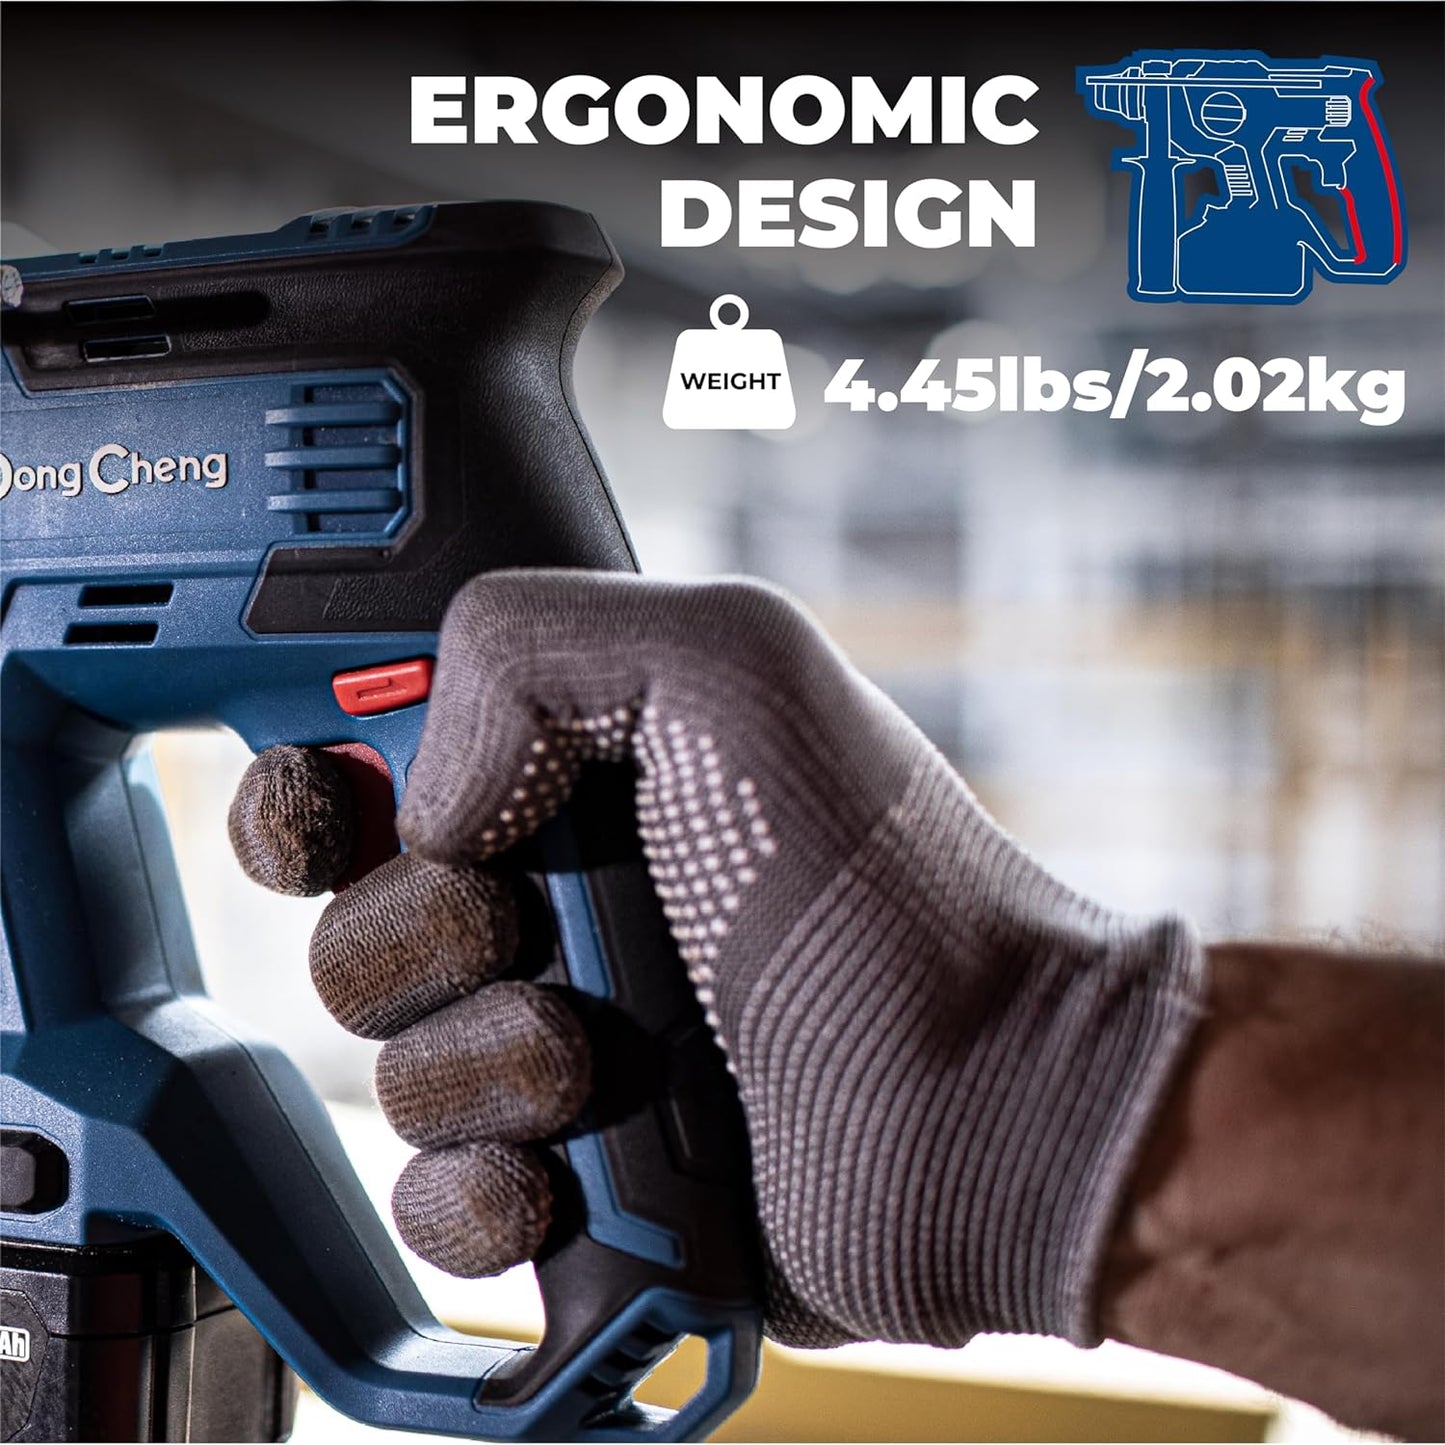 20V Max Brushless Rotary Hammer Drill, 2X4.0Ah Battery & Charger,7/8" SDS-Plus,2.1J Impact energy, 1400RPM, 4 modes